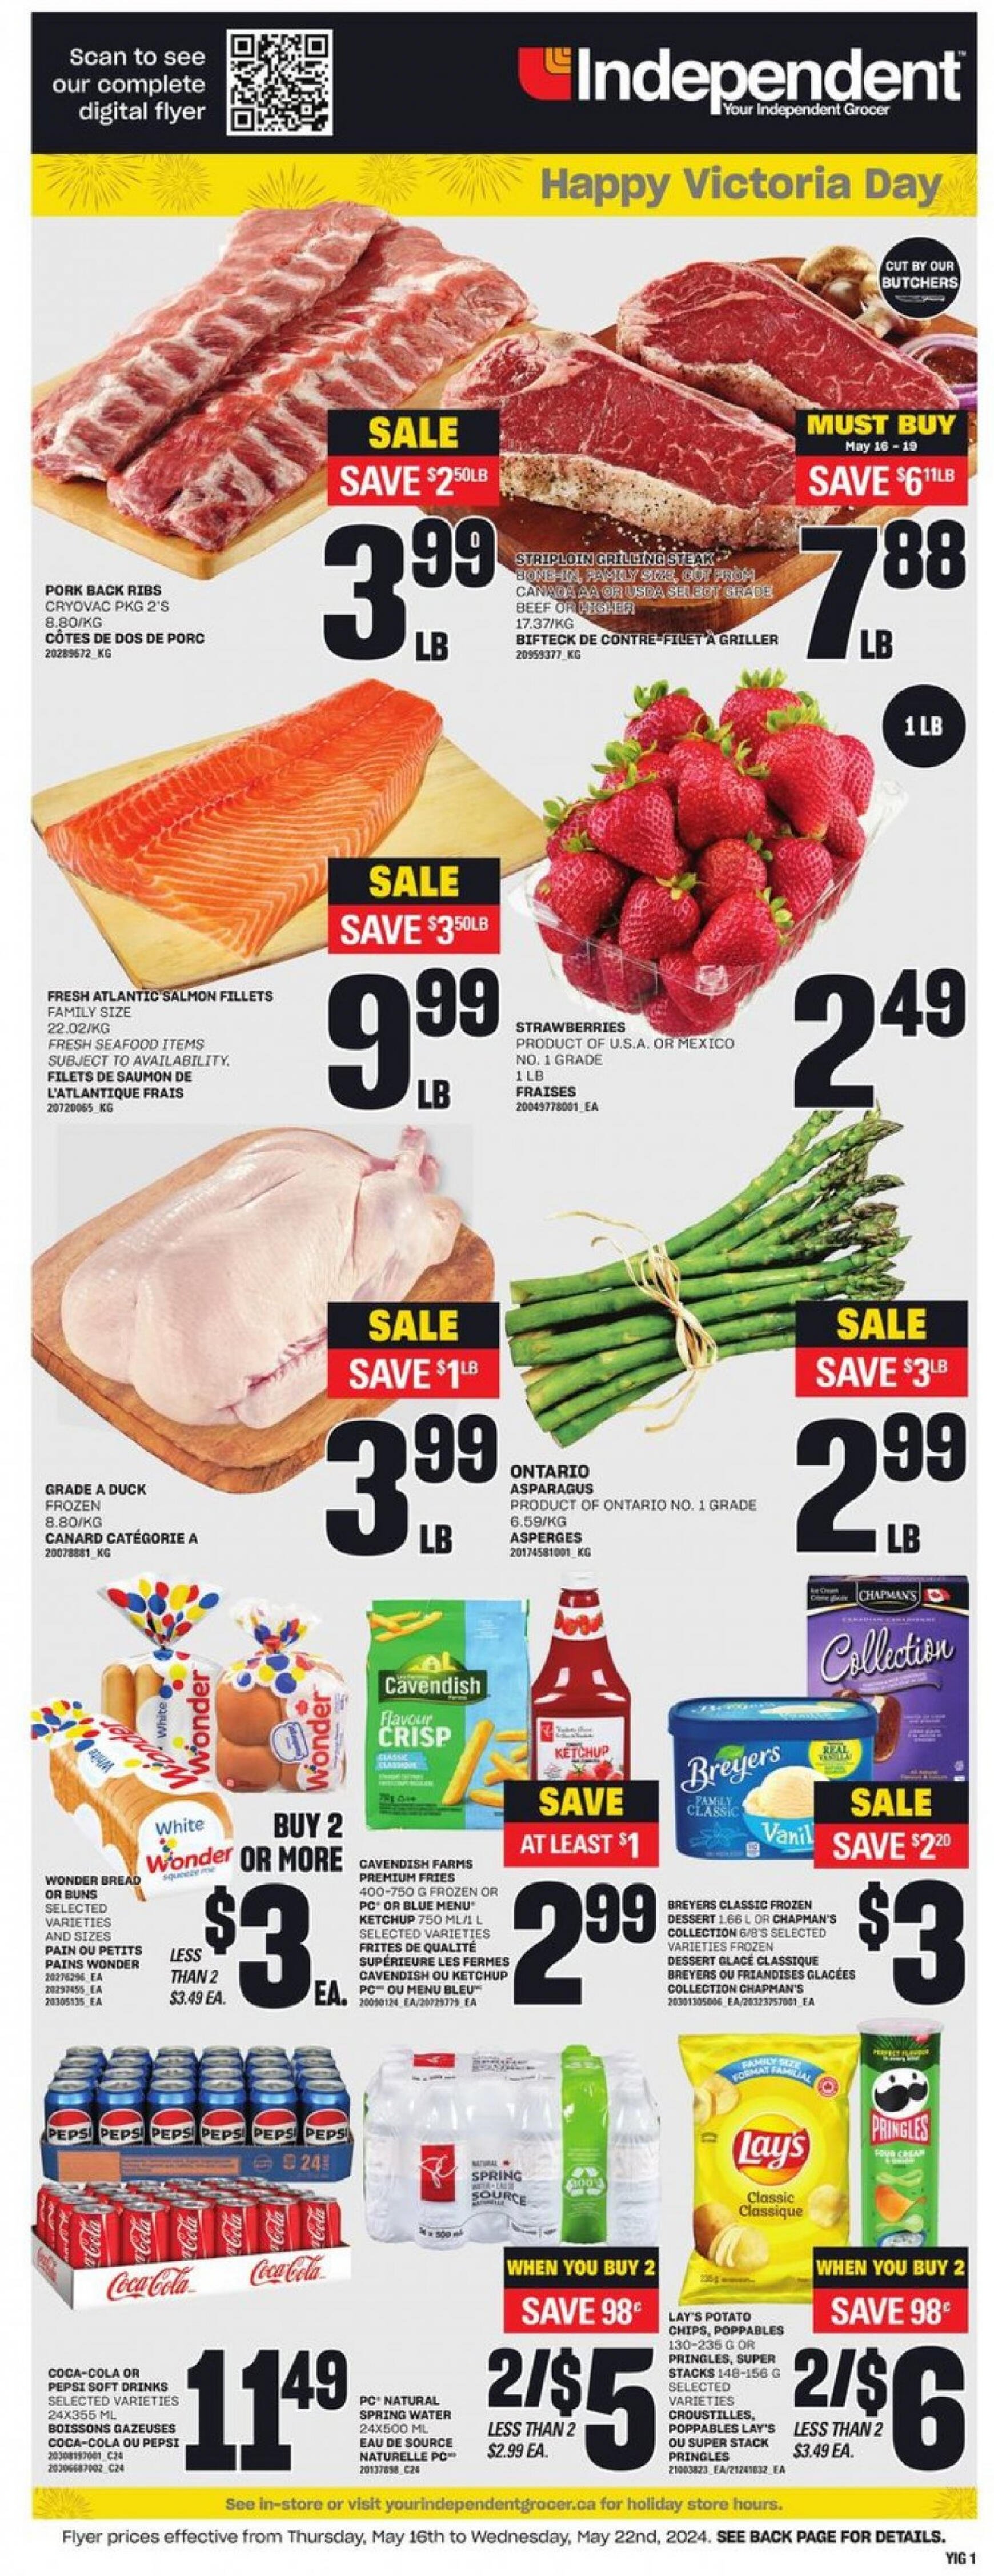 independent-grocery - Independent Grocery flyer current 01.05. - 31.05. - page: 5